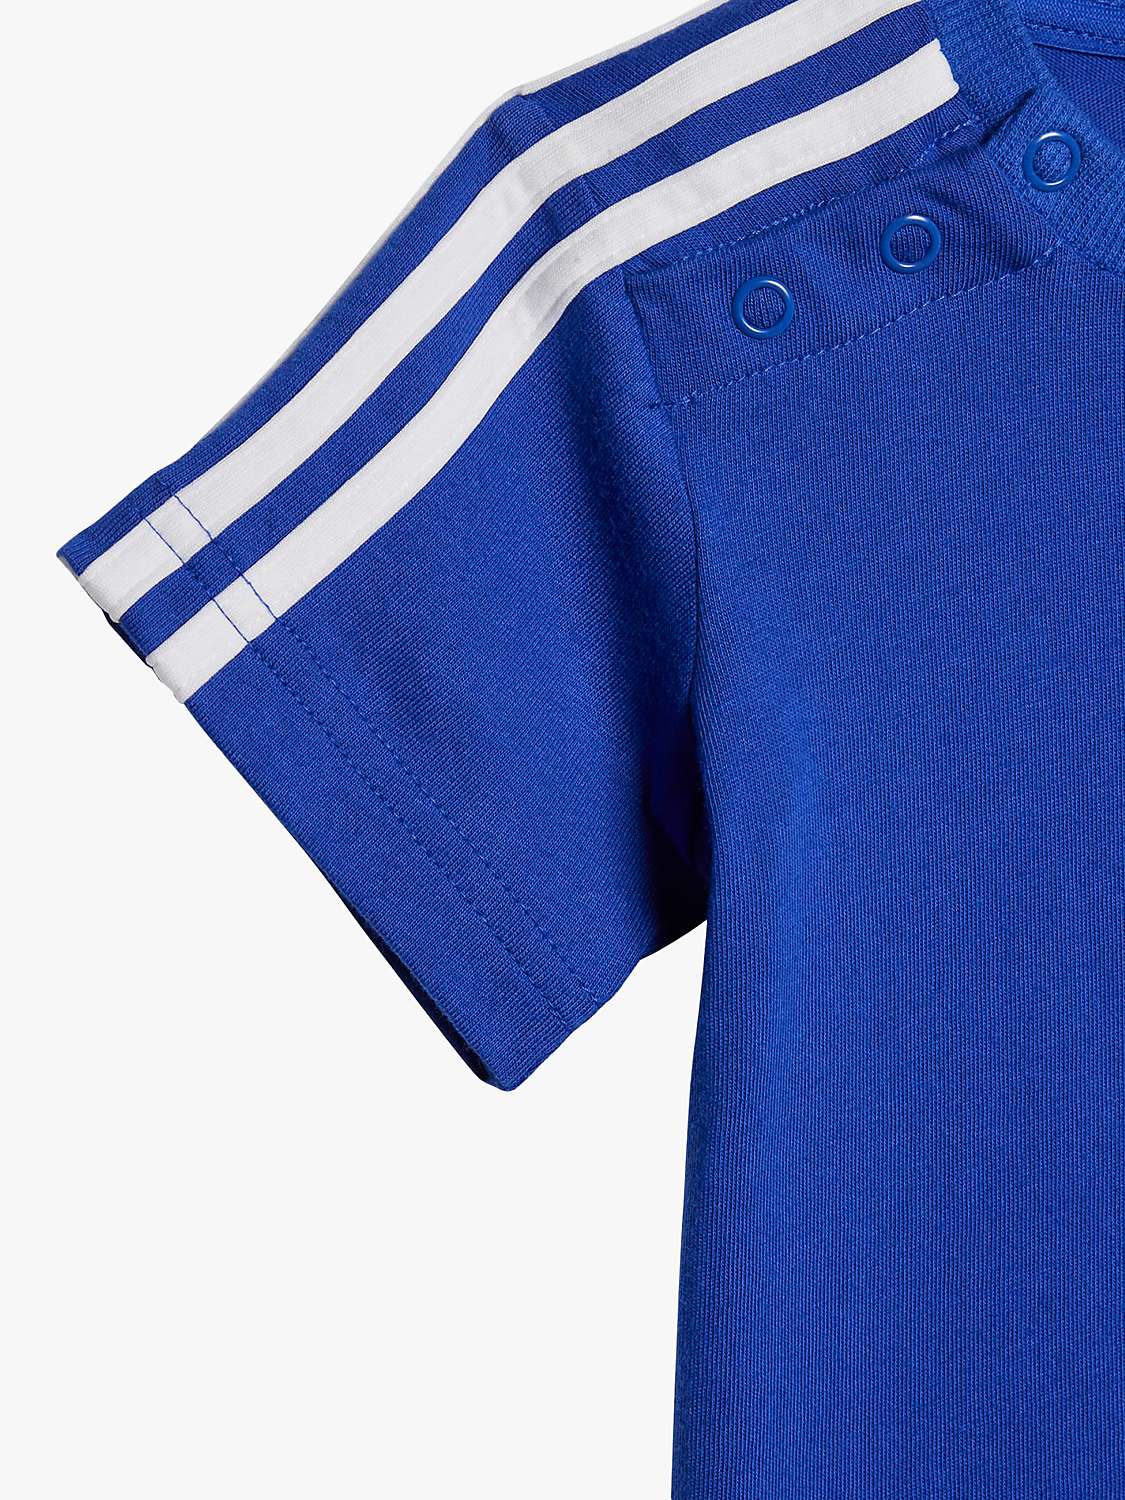 Buy adidas Baby Essentials Sport T-Shirt & Shorts Set, Selubl/White Online at johnlewis.com